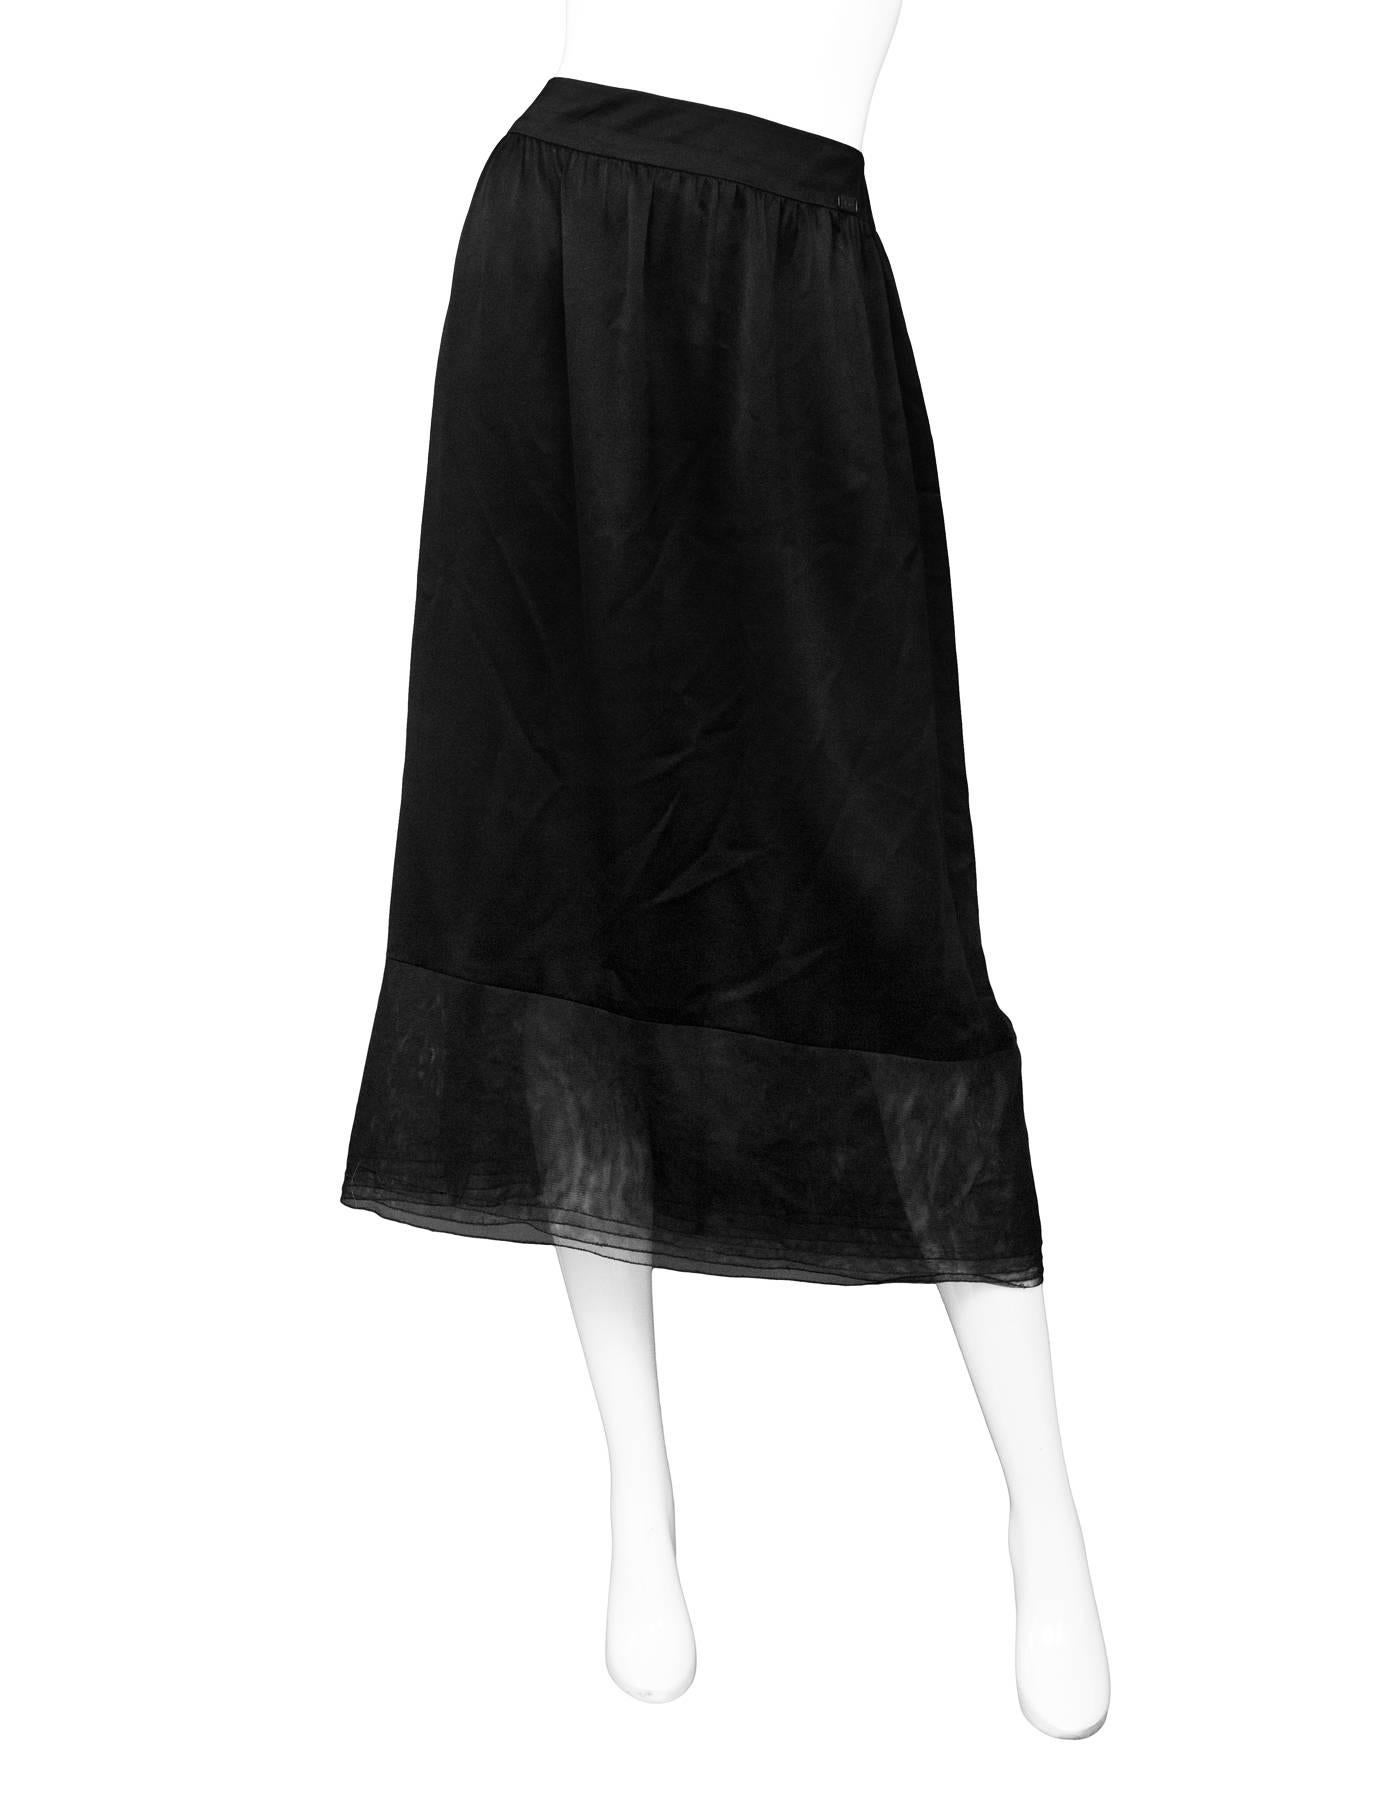 Chanel Black Silk Skirt Sz FR42

Made In: France
Year of Production: 1999
Color: Black
Composition: 100% Silk
Lining: Black silk
Closure/Opening: Back zip closure
Overall Condition: Excellent pre-owned condition
Marked Size: FR42/ US10
Waist: